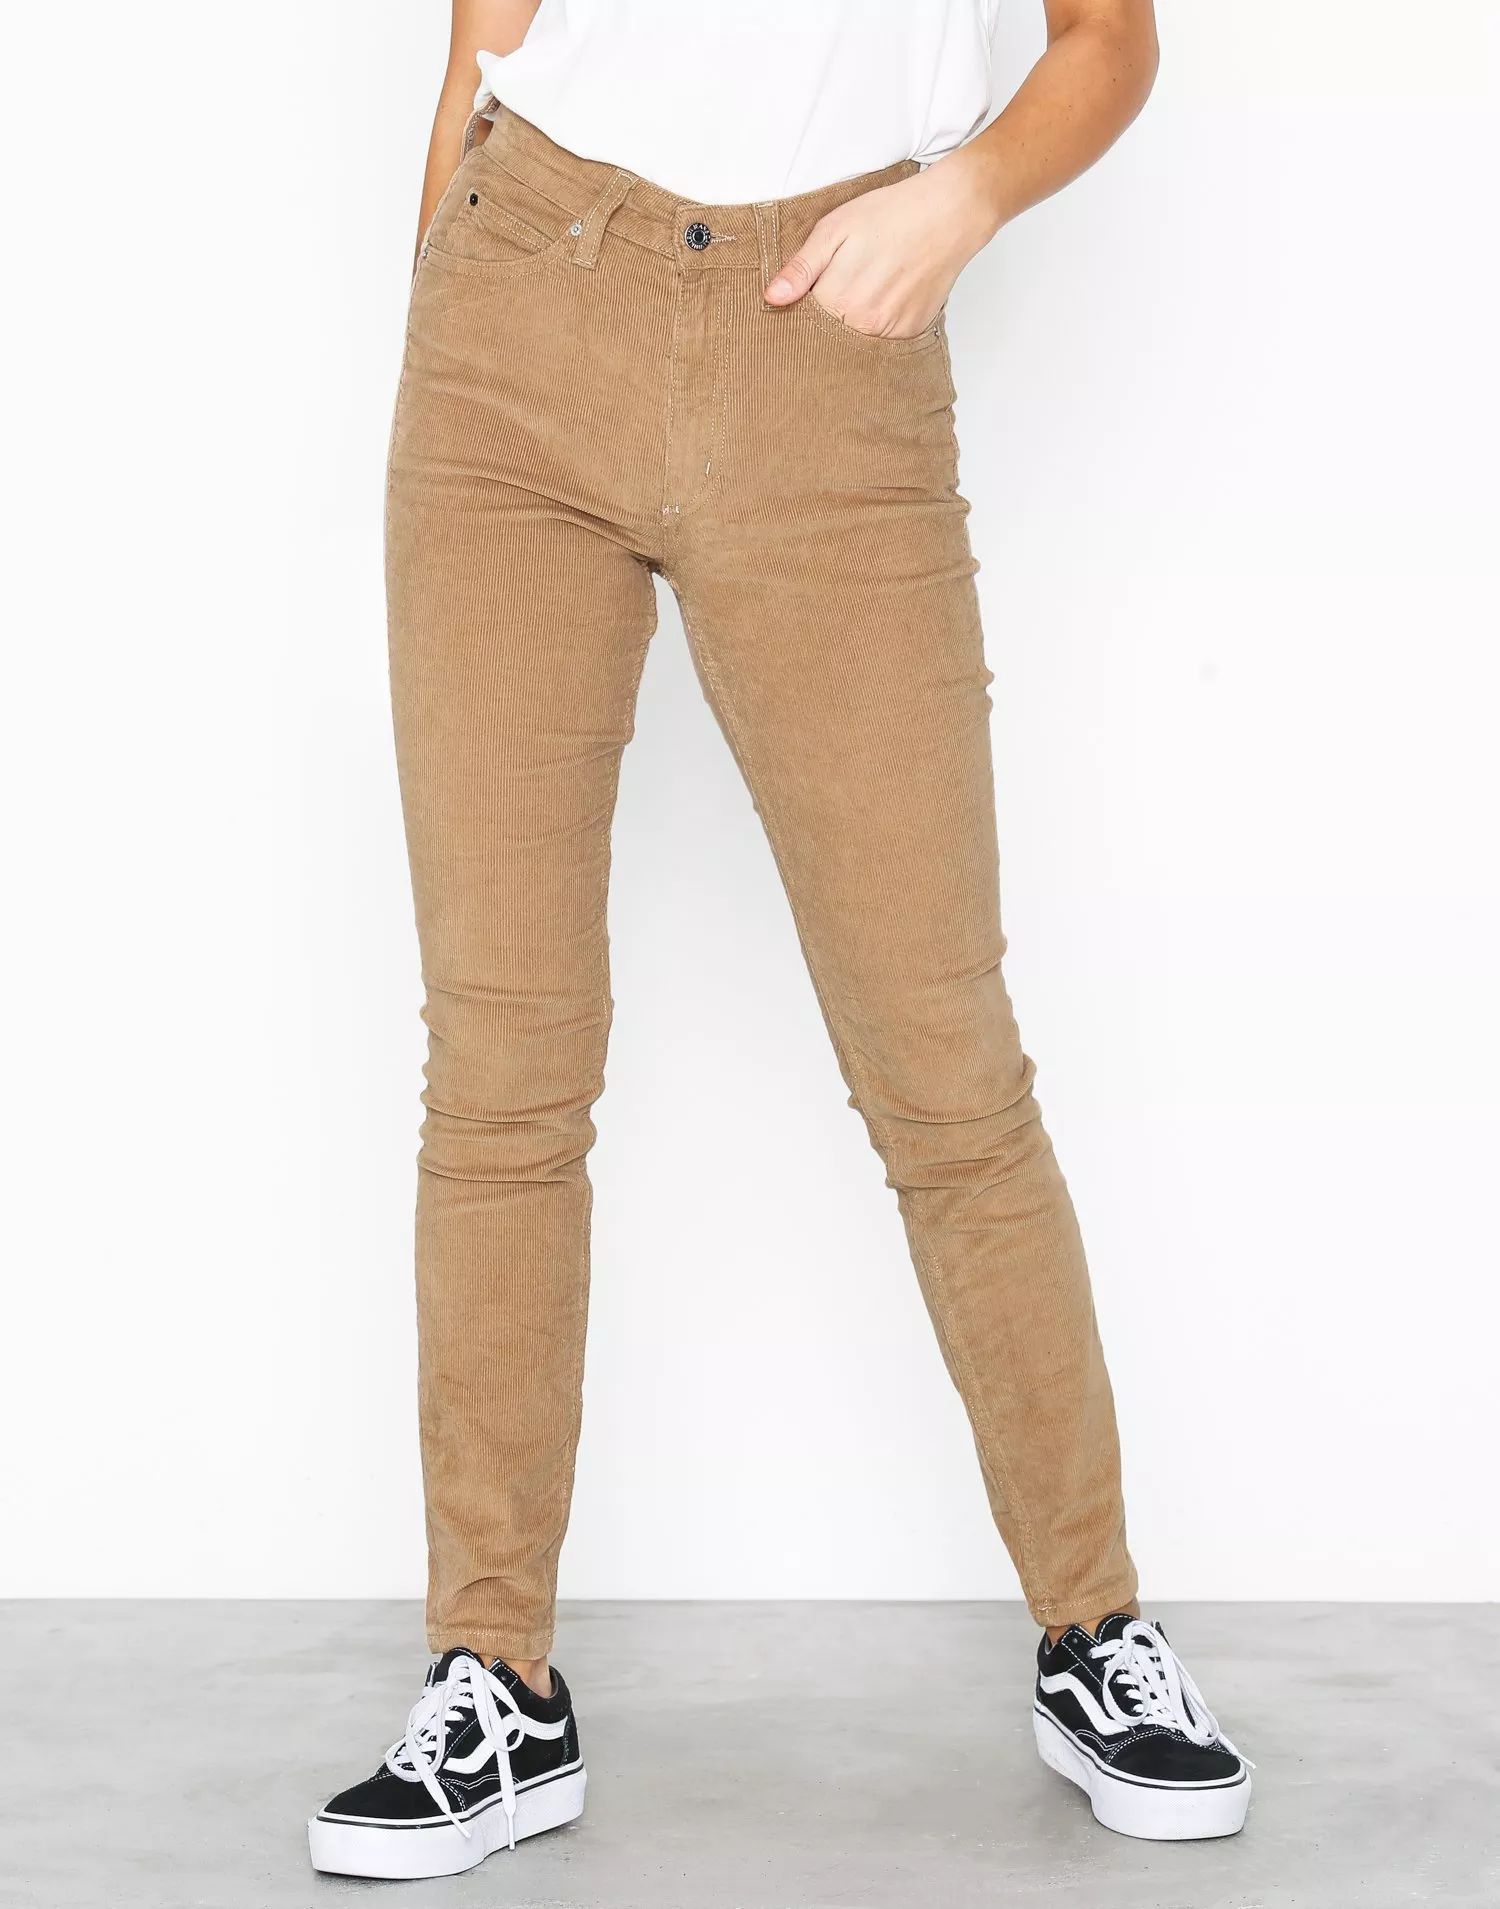 RSQ Womens Low Rise Cargo Flare Pants - TAN